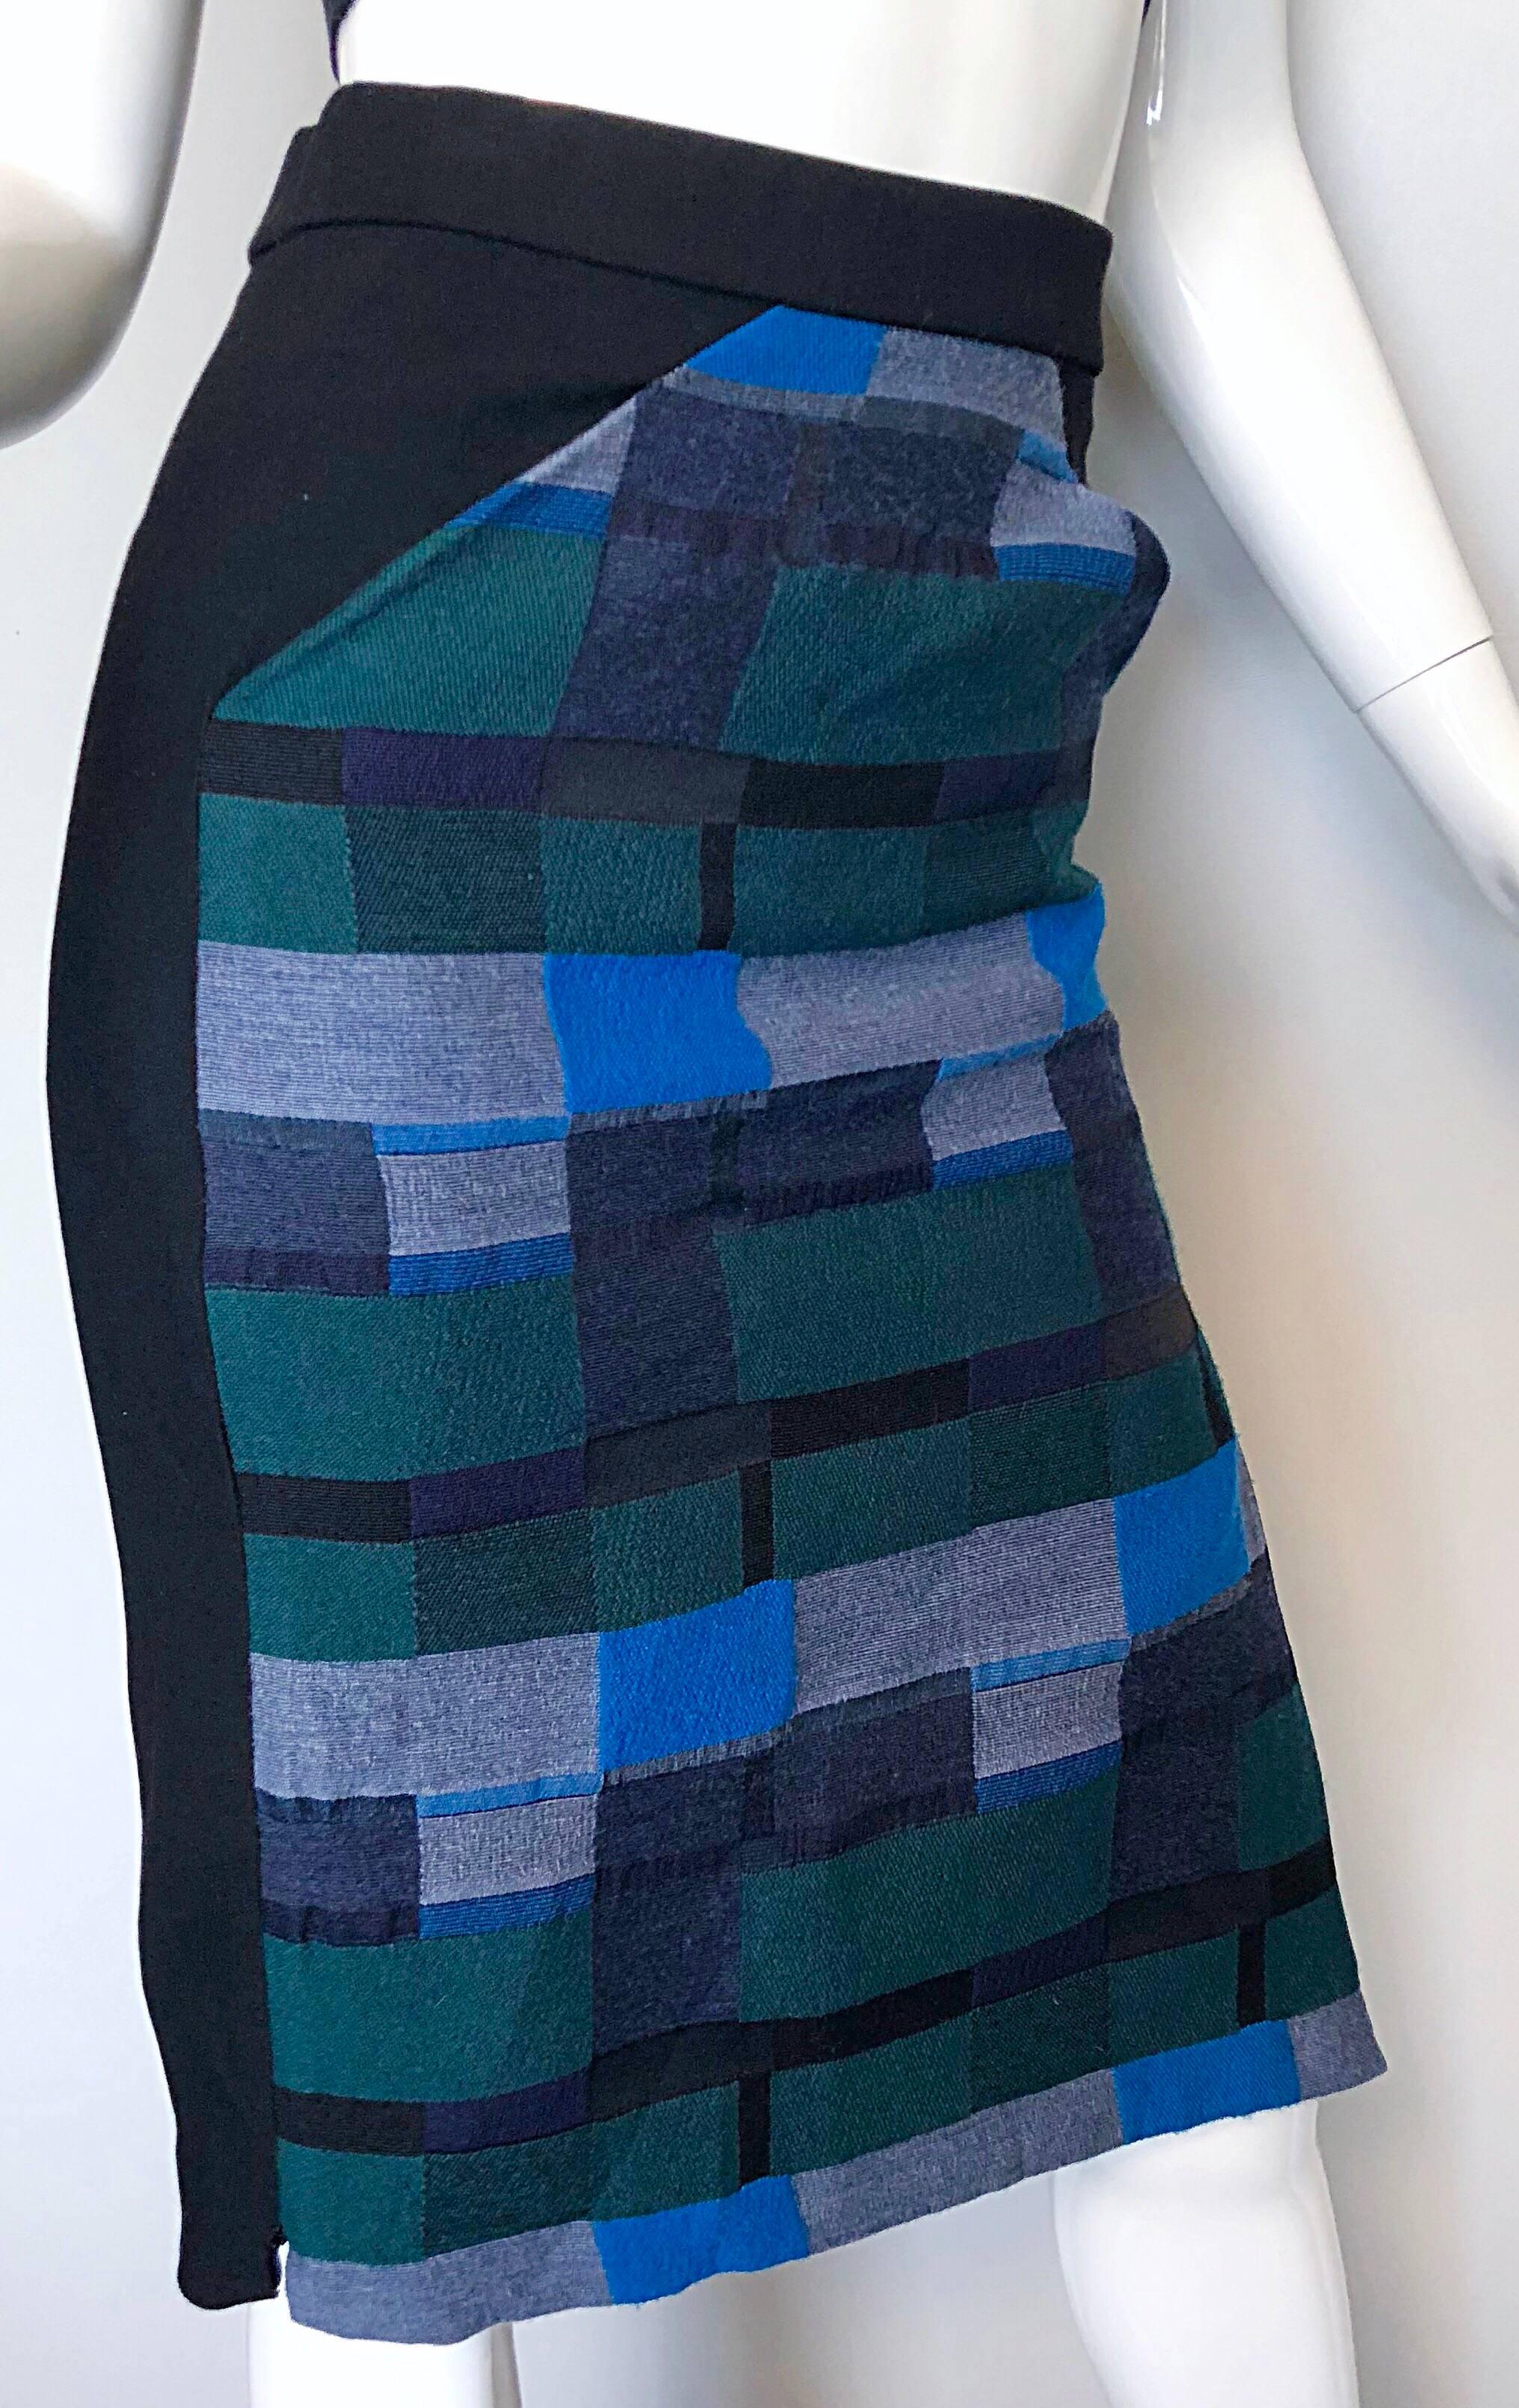 Zero + Maria Cornejo Block Print Black + Blue + Green High Waisted Pencil Skirt In Excellent Condition For Sale In San Diego, CA